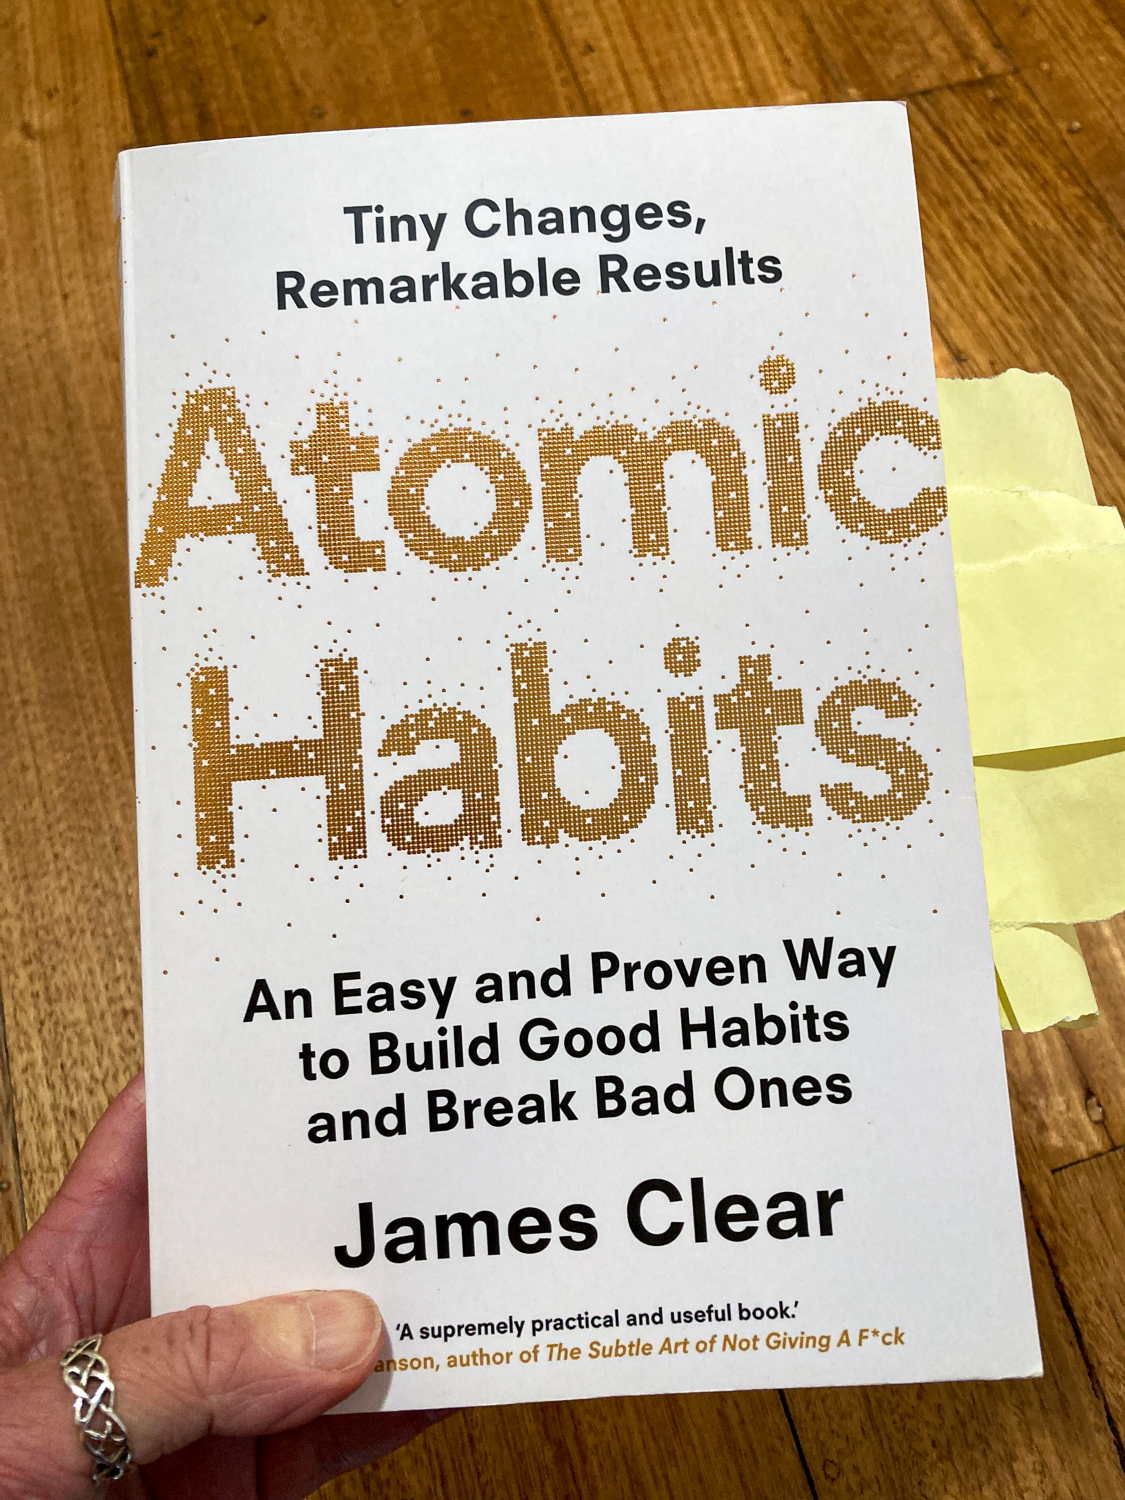 The cover of the book Atomic Habits: Tiny Changes, Remarkable Results. An easy and proven way to build good habits and break bad ones.